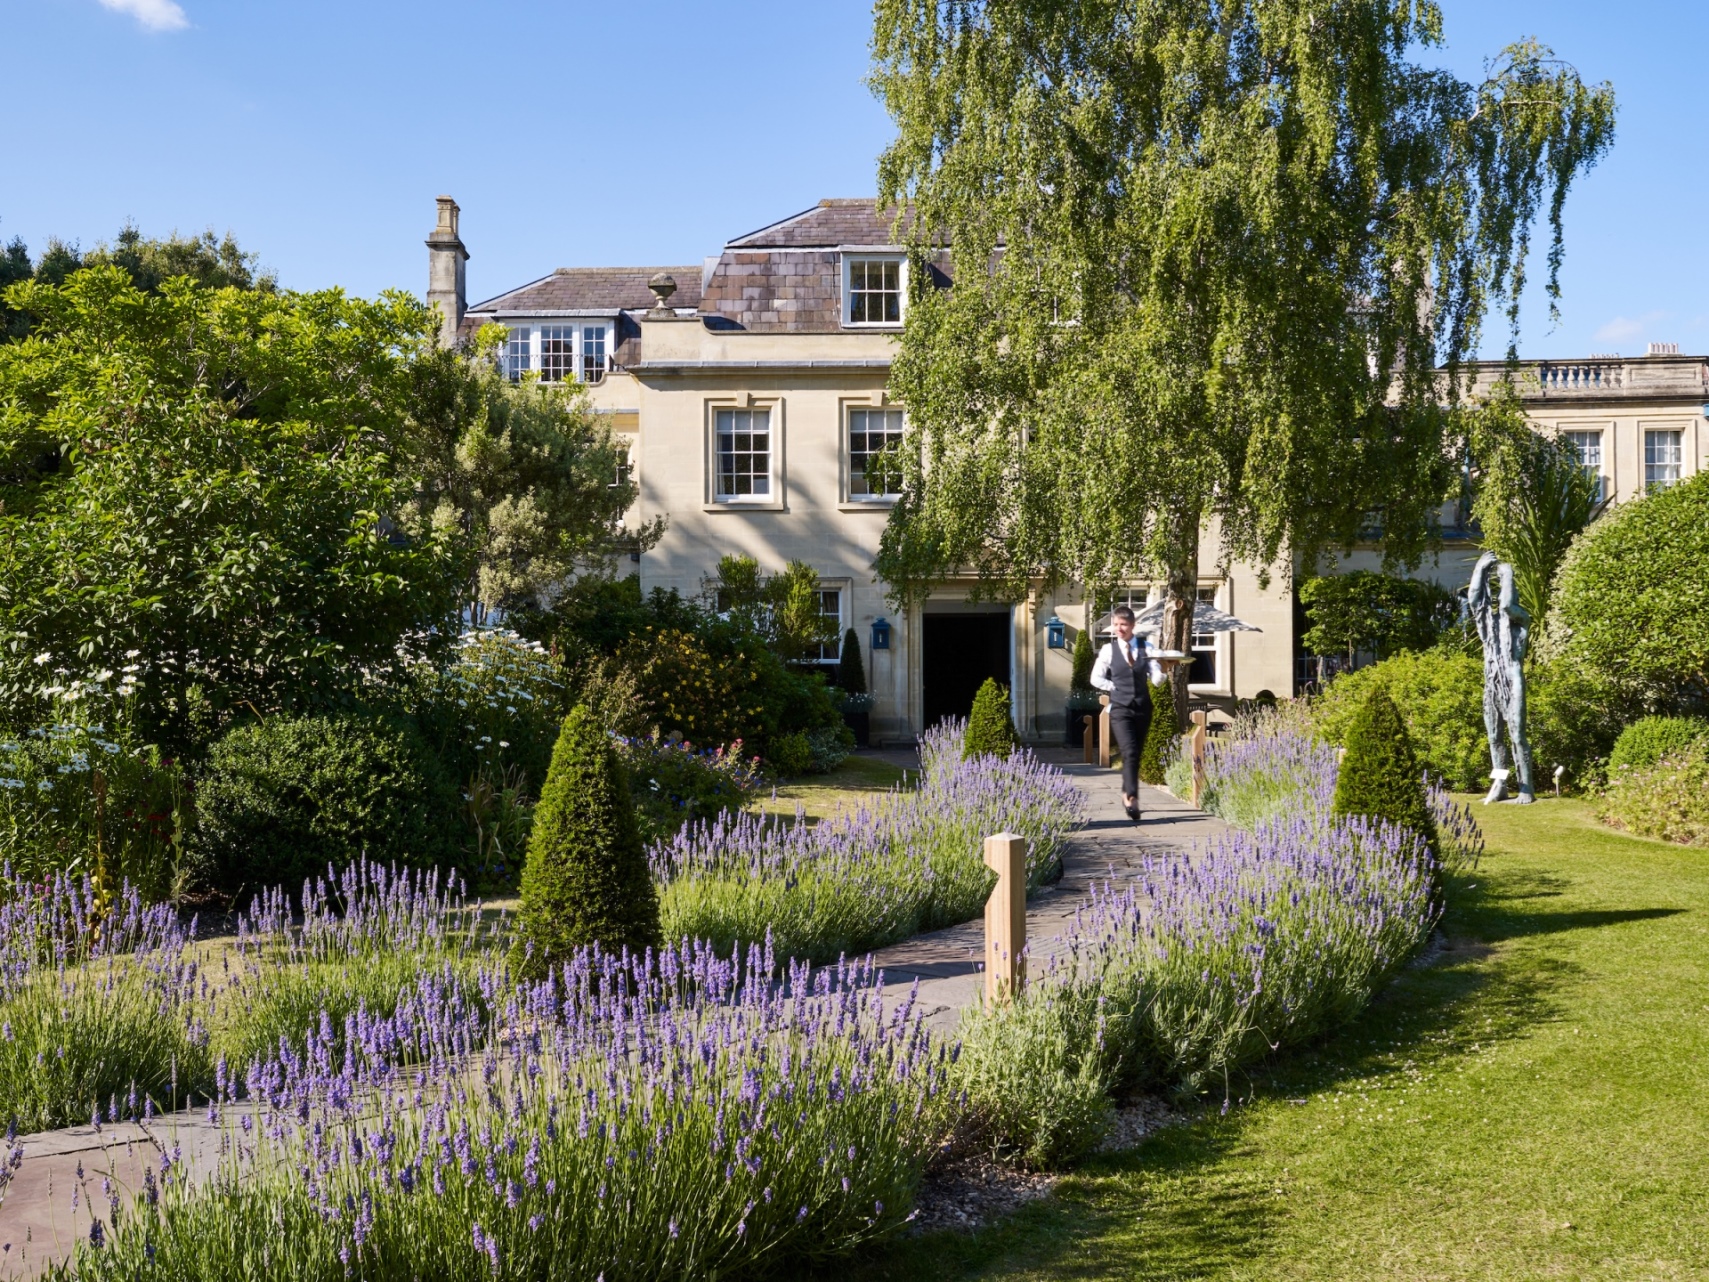 The Royal Crescent Hotel & Spa Garden (15th July 2019)